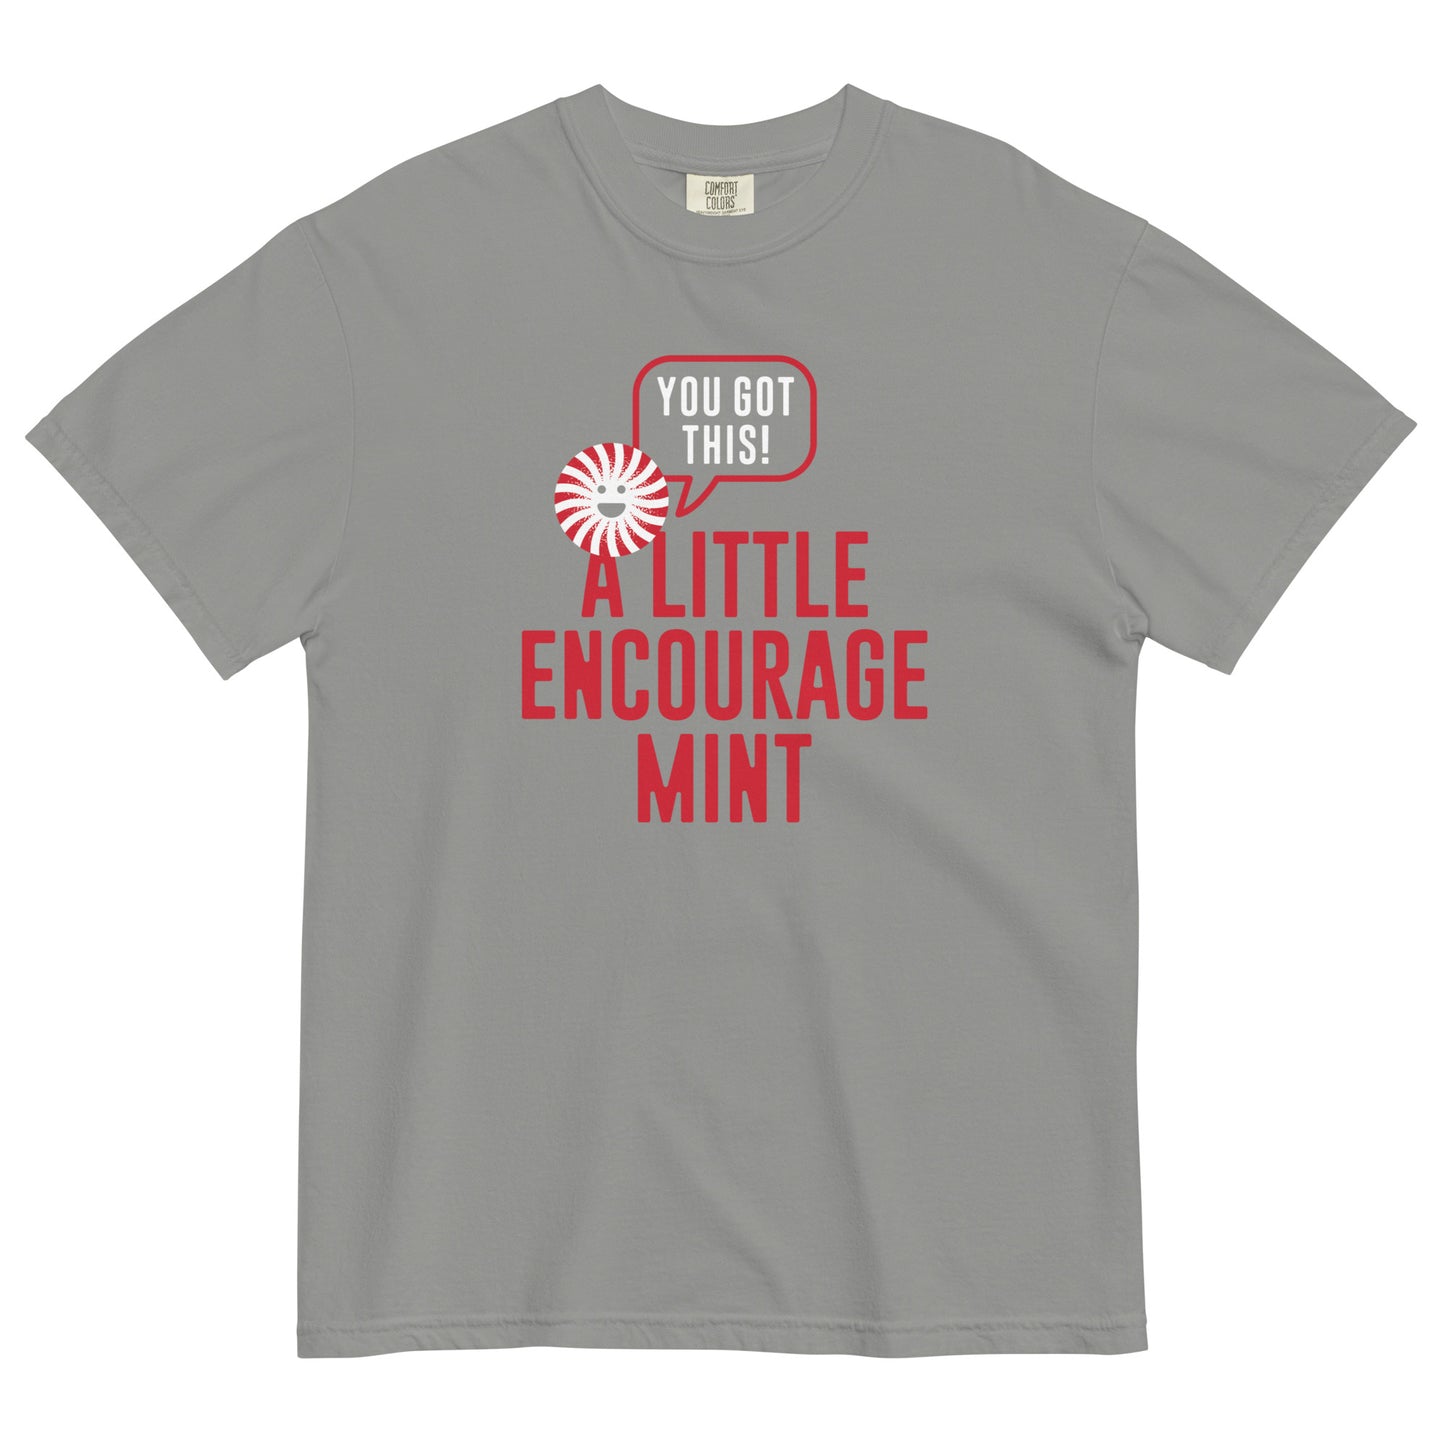 A Little Encourage Mint Men's Relaxed Fit Tee